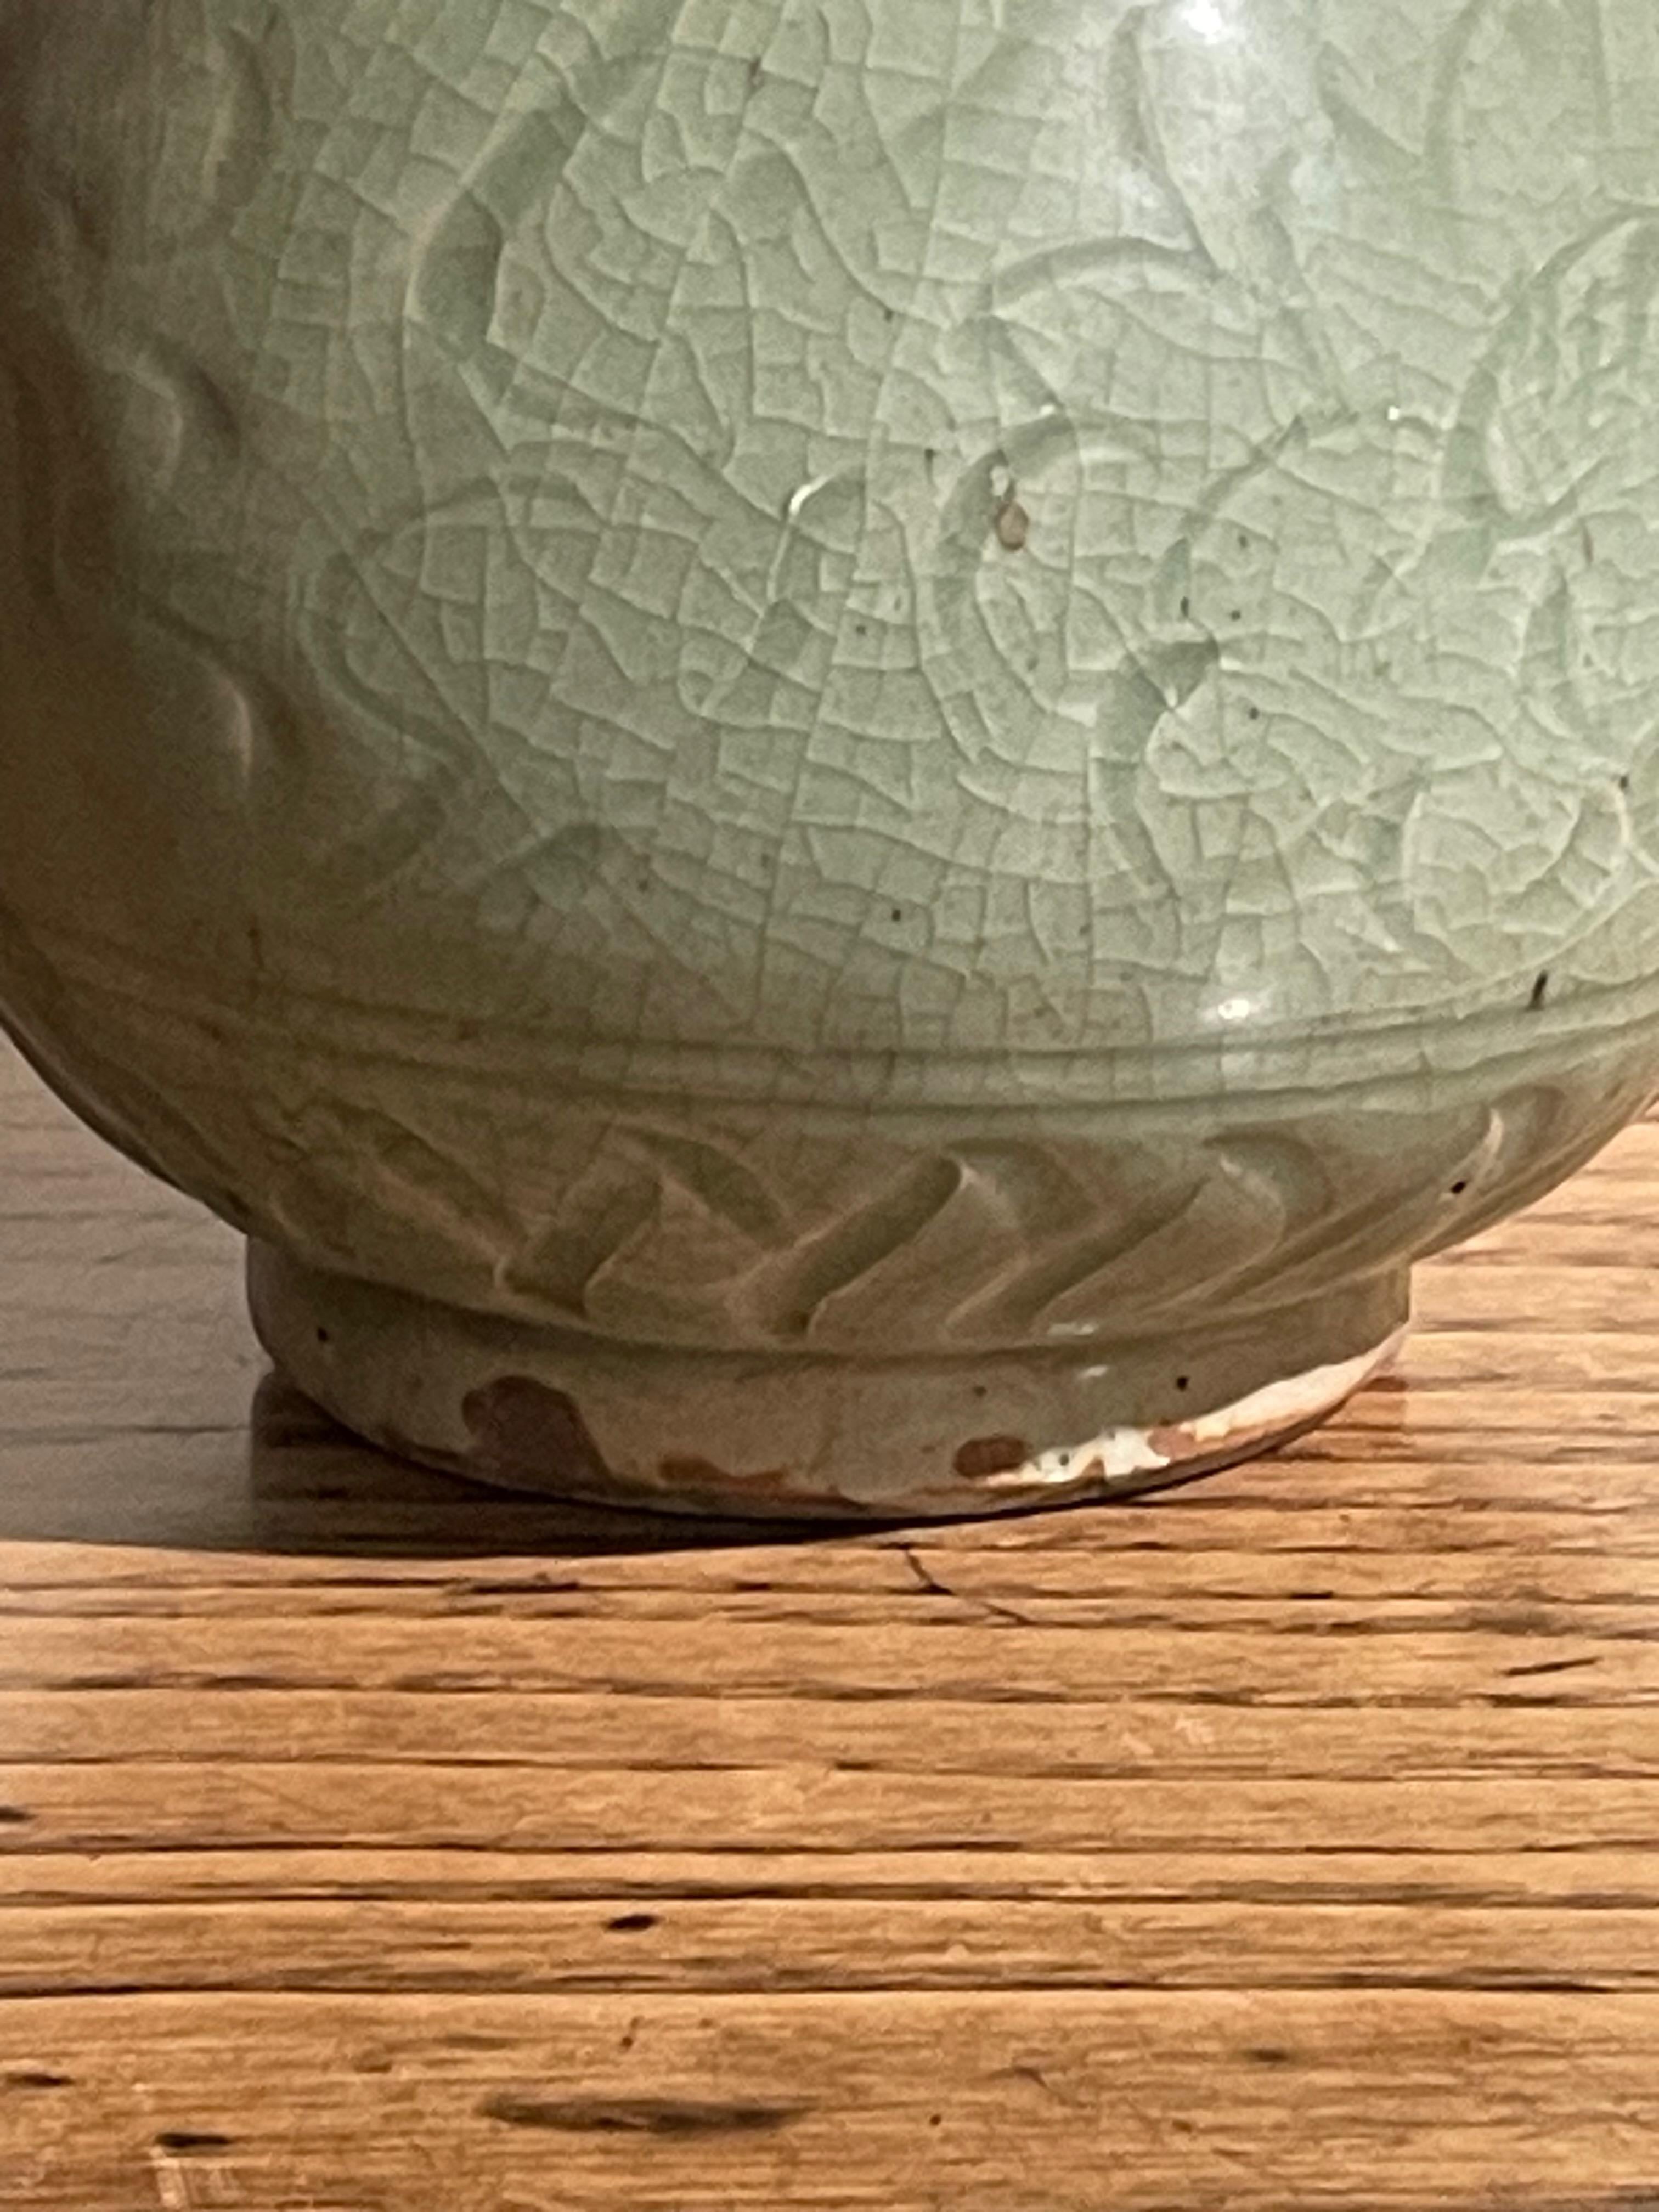 Pale Celedon Decorative Patterned Thin Neck Vase, China, Contemporary In New Condition For Sale In New York, NY